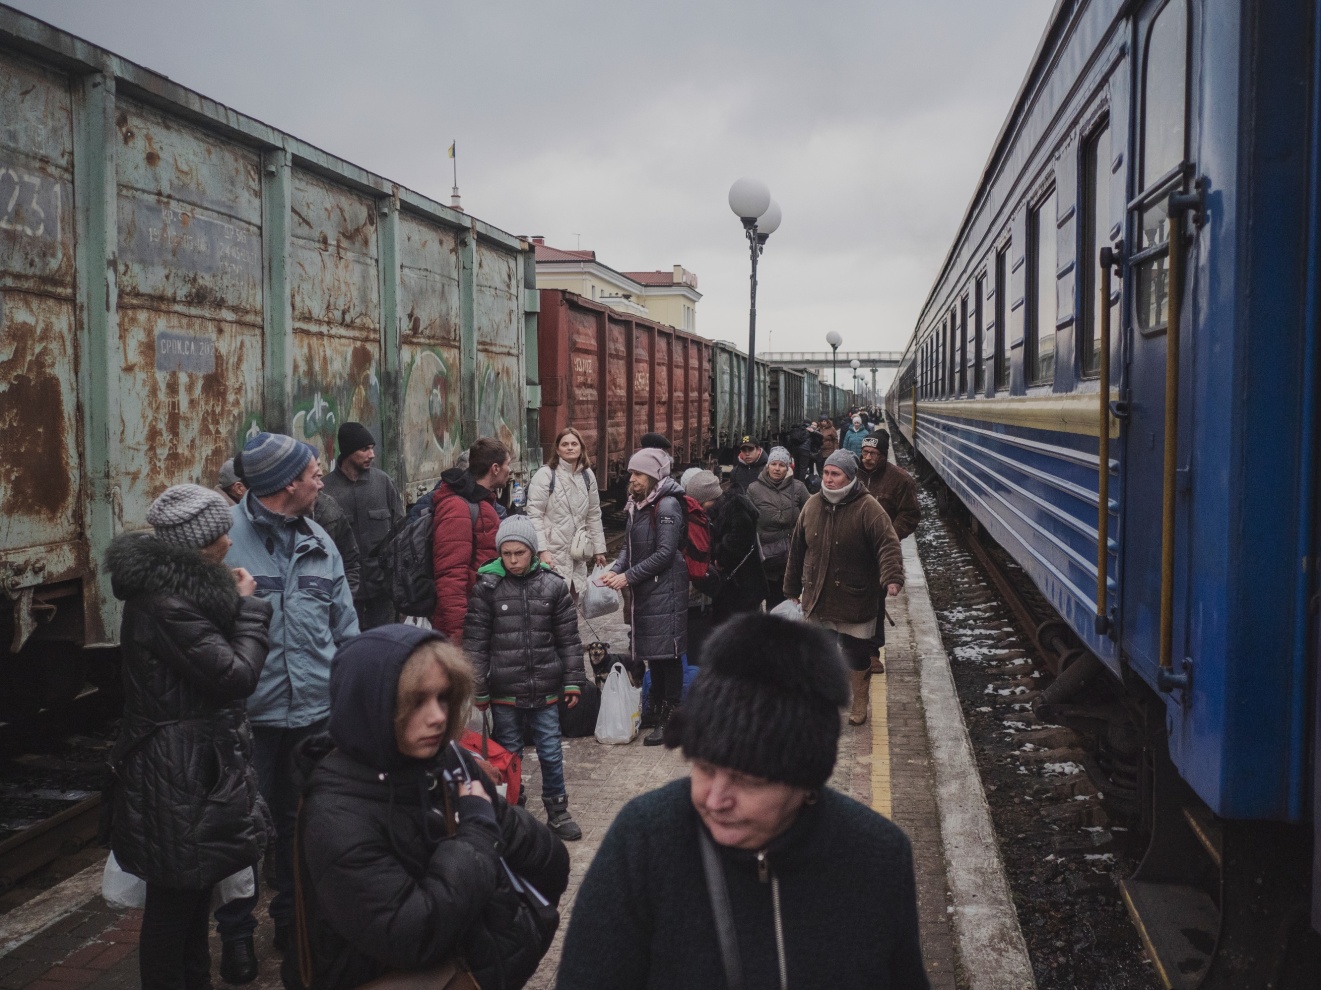 002_brokenpromises - Ukraine; Kherson; 2023

Evacuation of inhabitants of Kherson and outskirt. The city is still on danger because the daily shelling in the area.